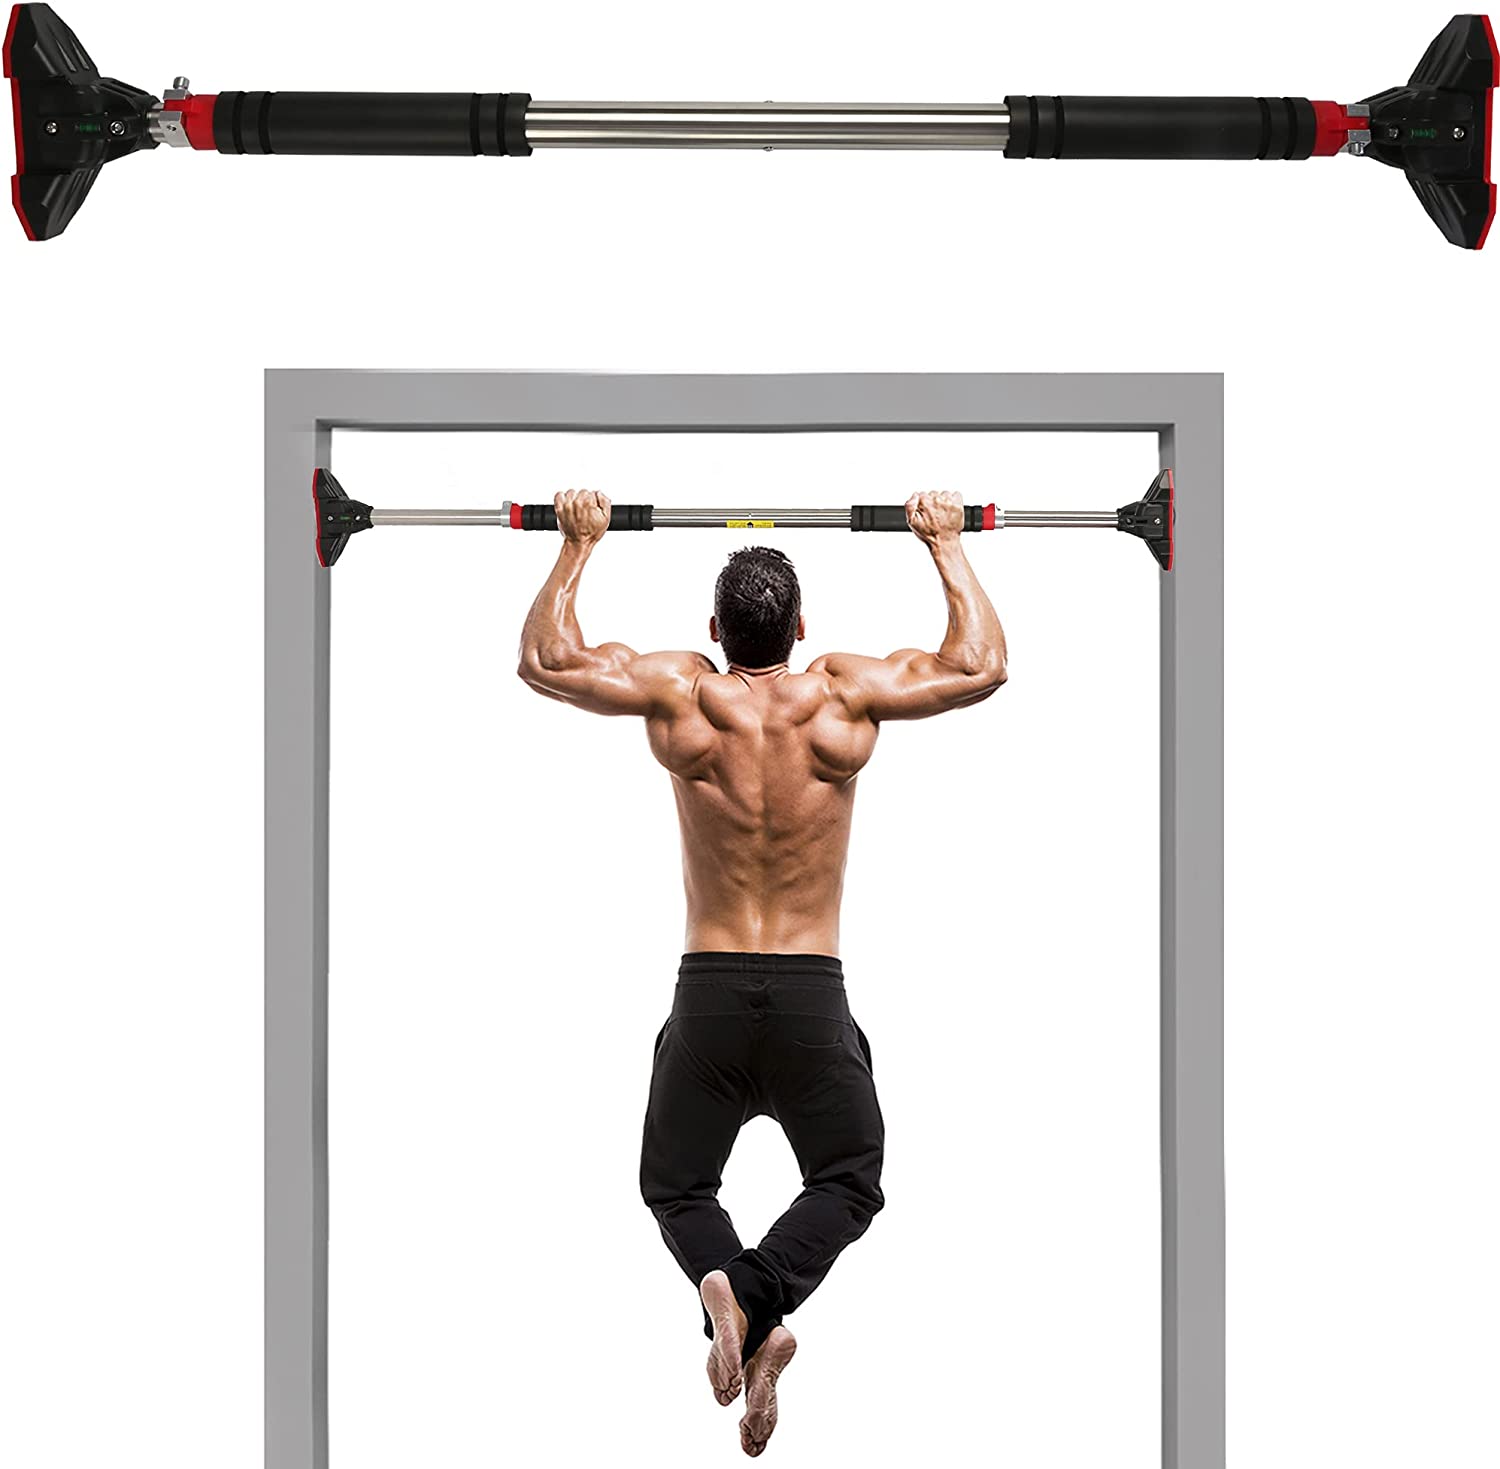 (Out of Stock) 2 X Doorway Pull up Bar Multifunctional Locking Chin Up Bar w/ Adjustable Width